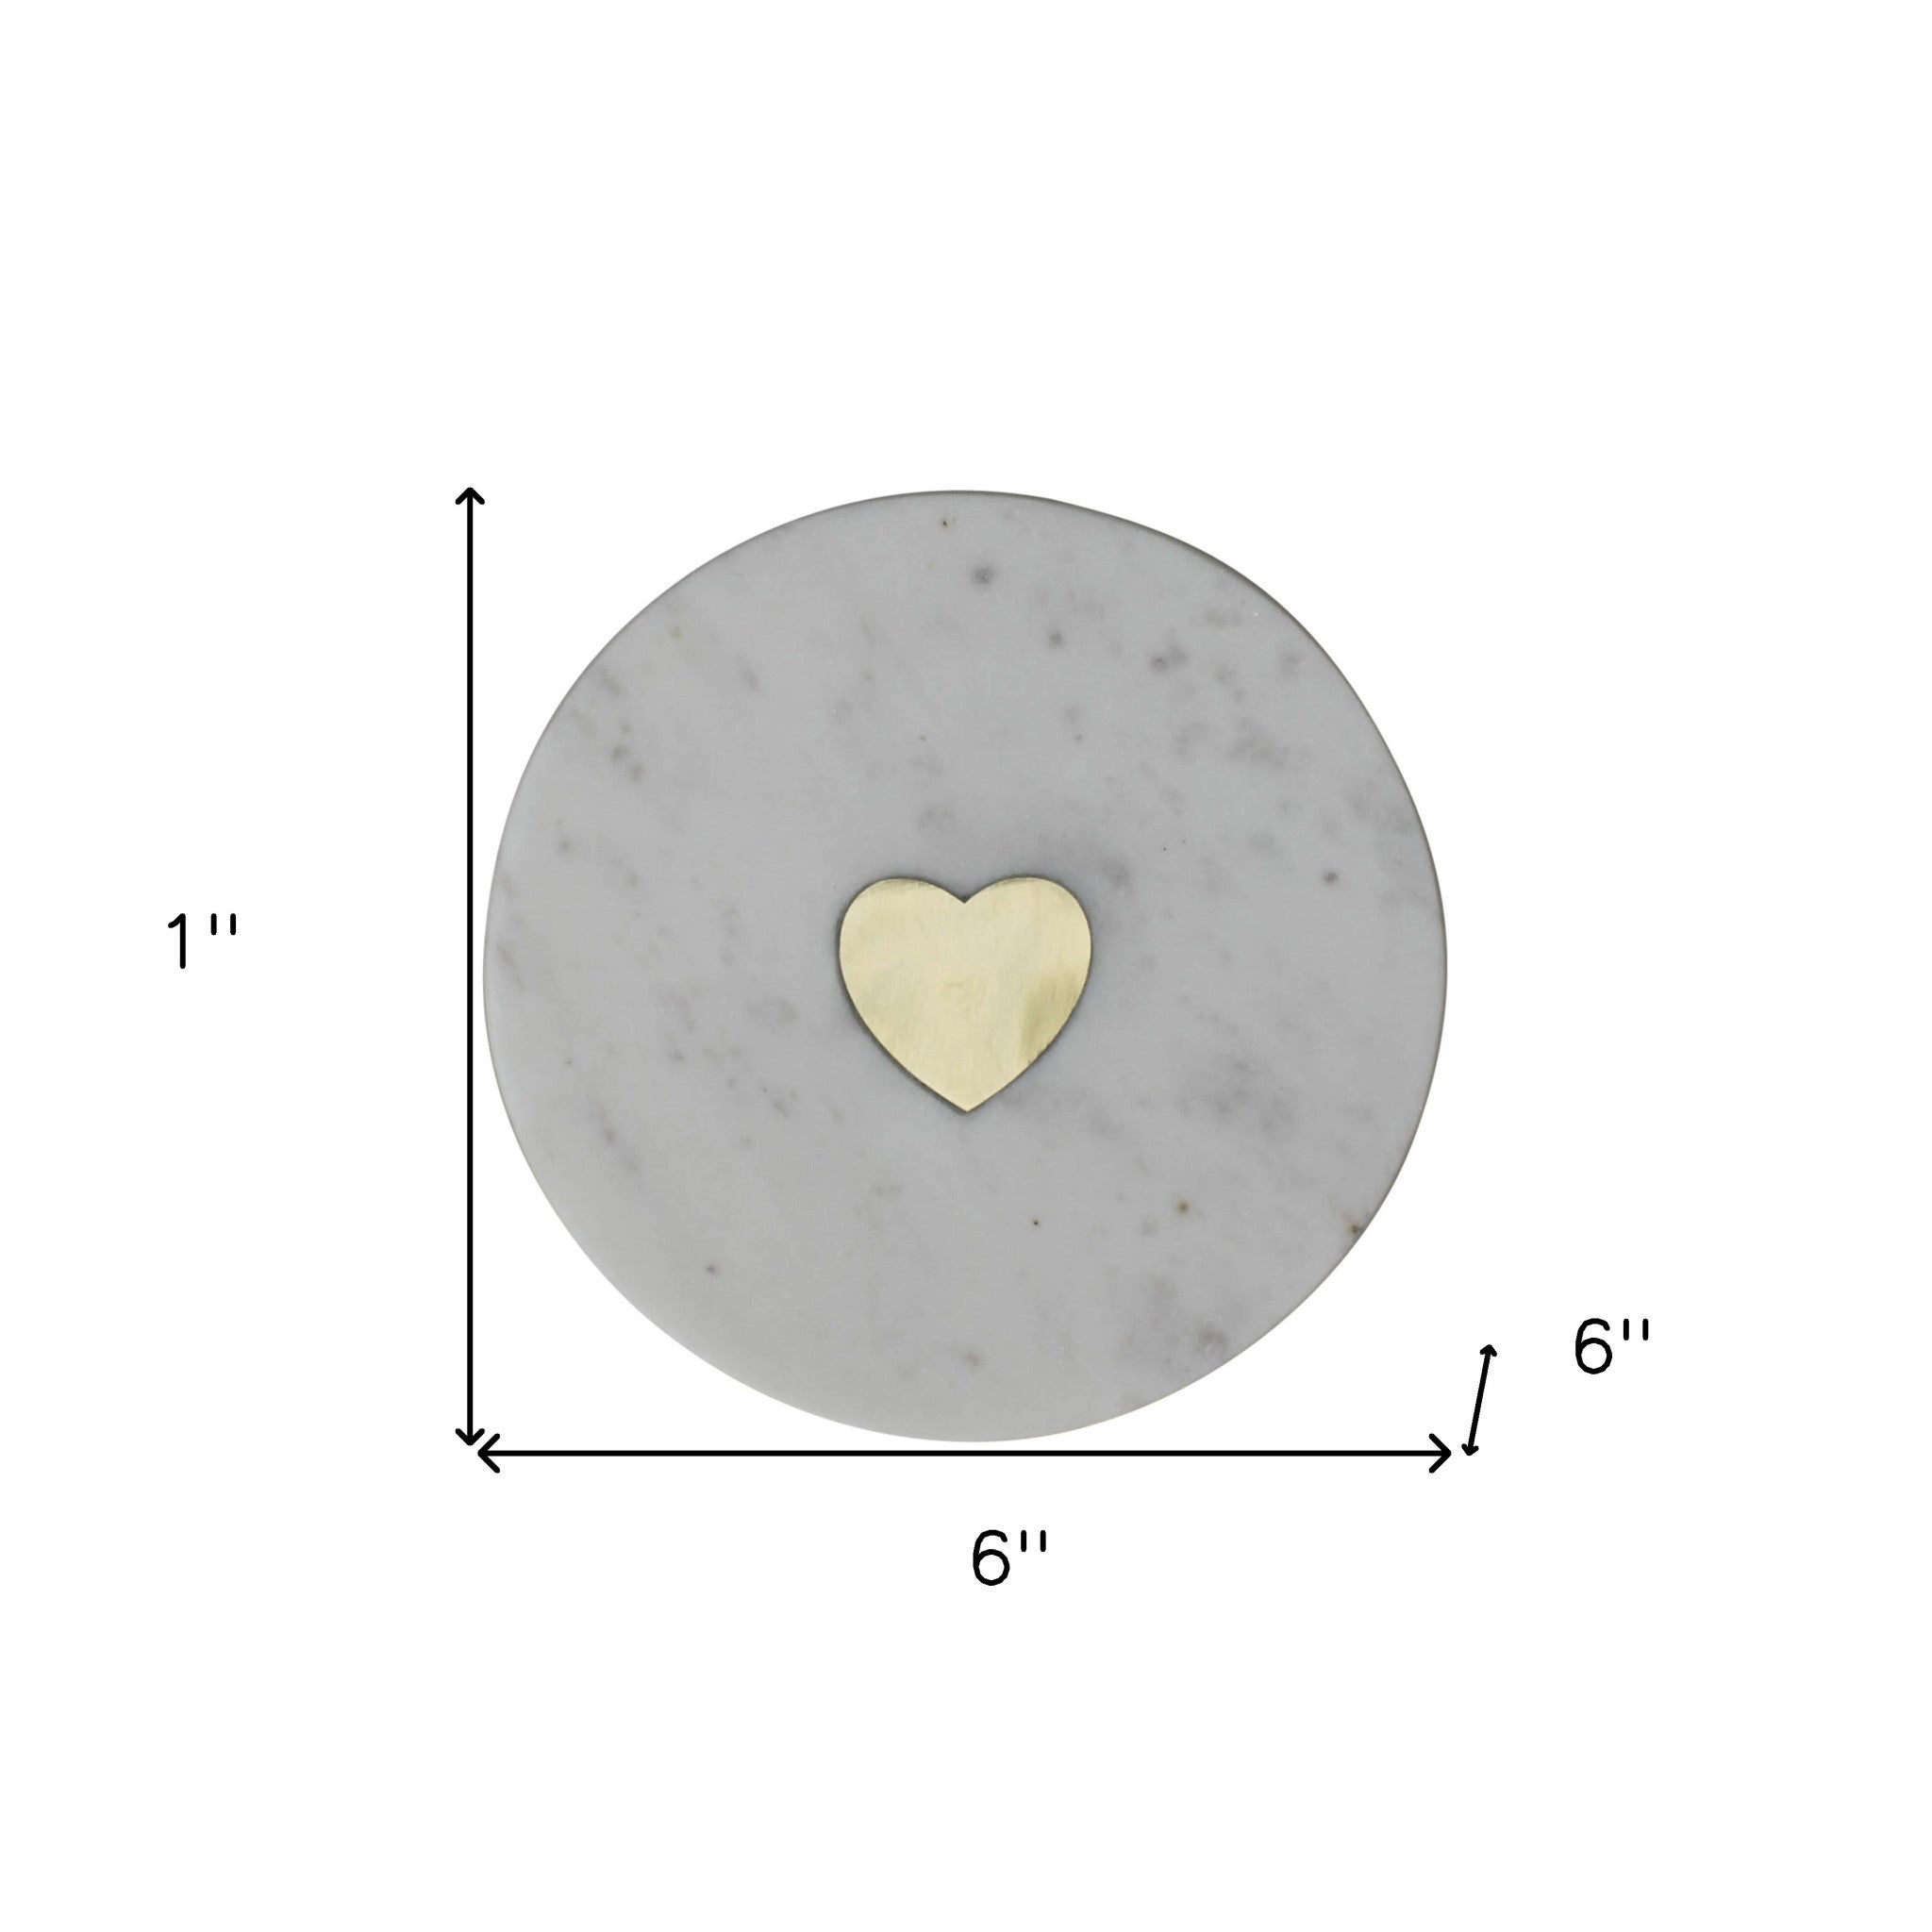 6" White and Gold Heart Inlay Round Marble Serve Board